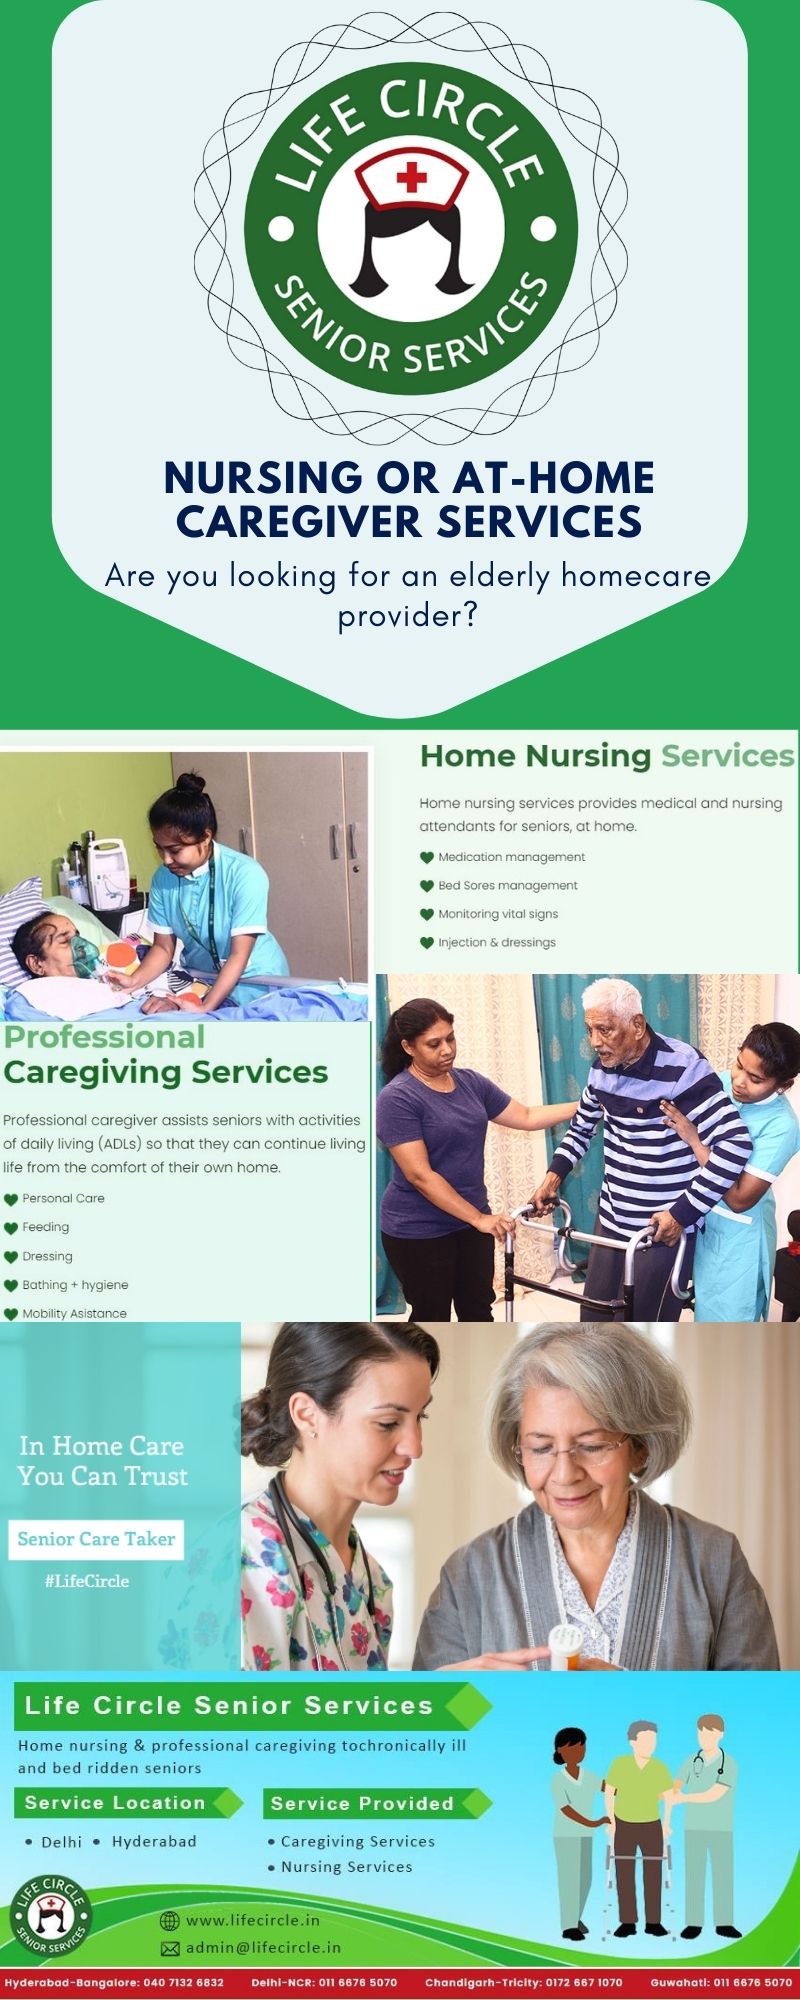 Nursing Services at Home in Hyderabad.jpg  by lifecirclehealth